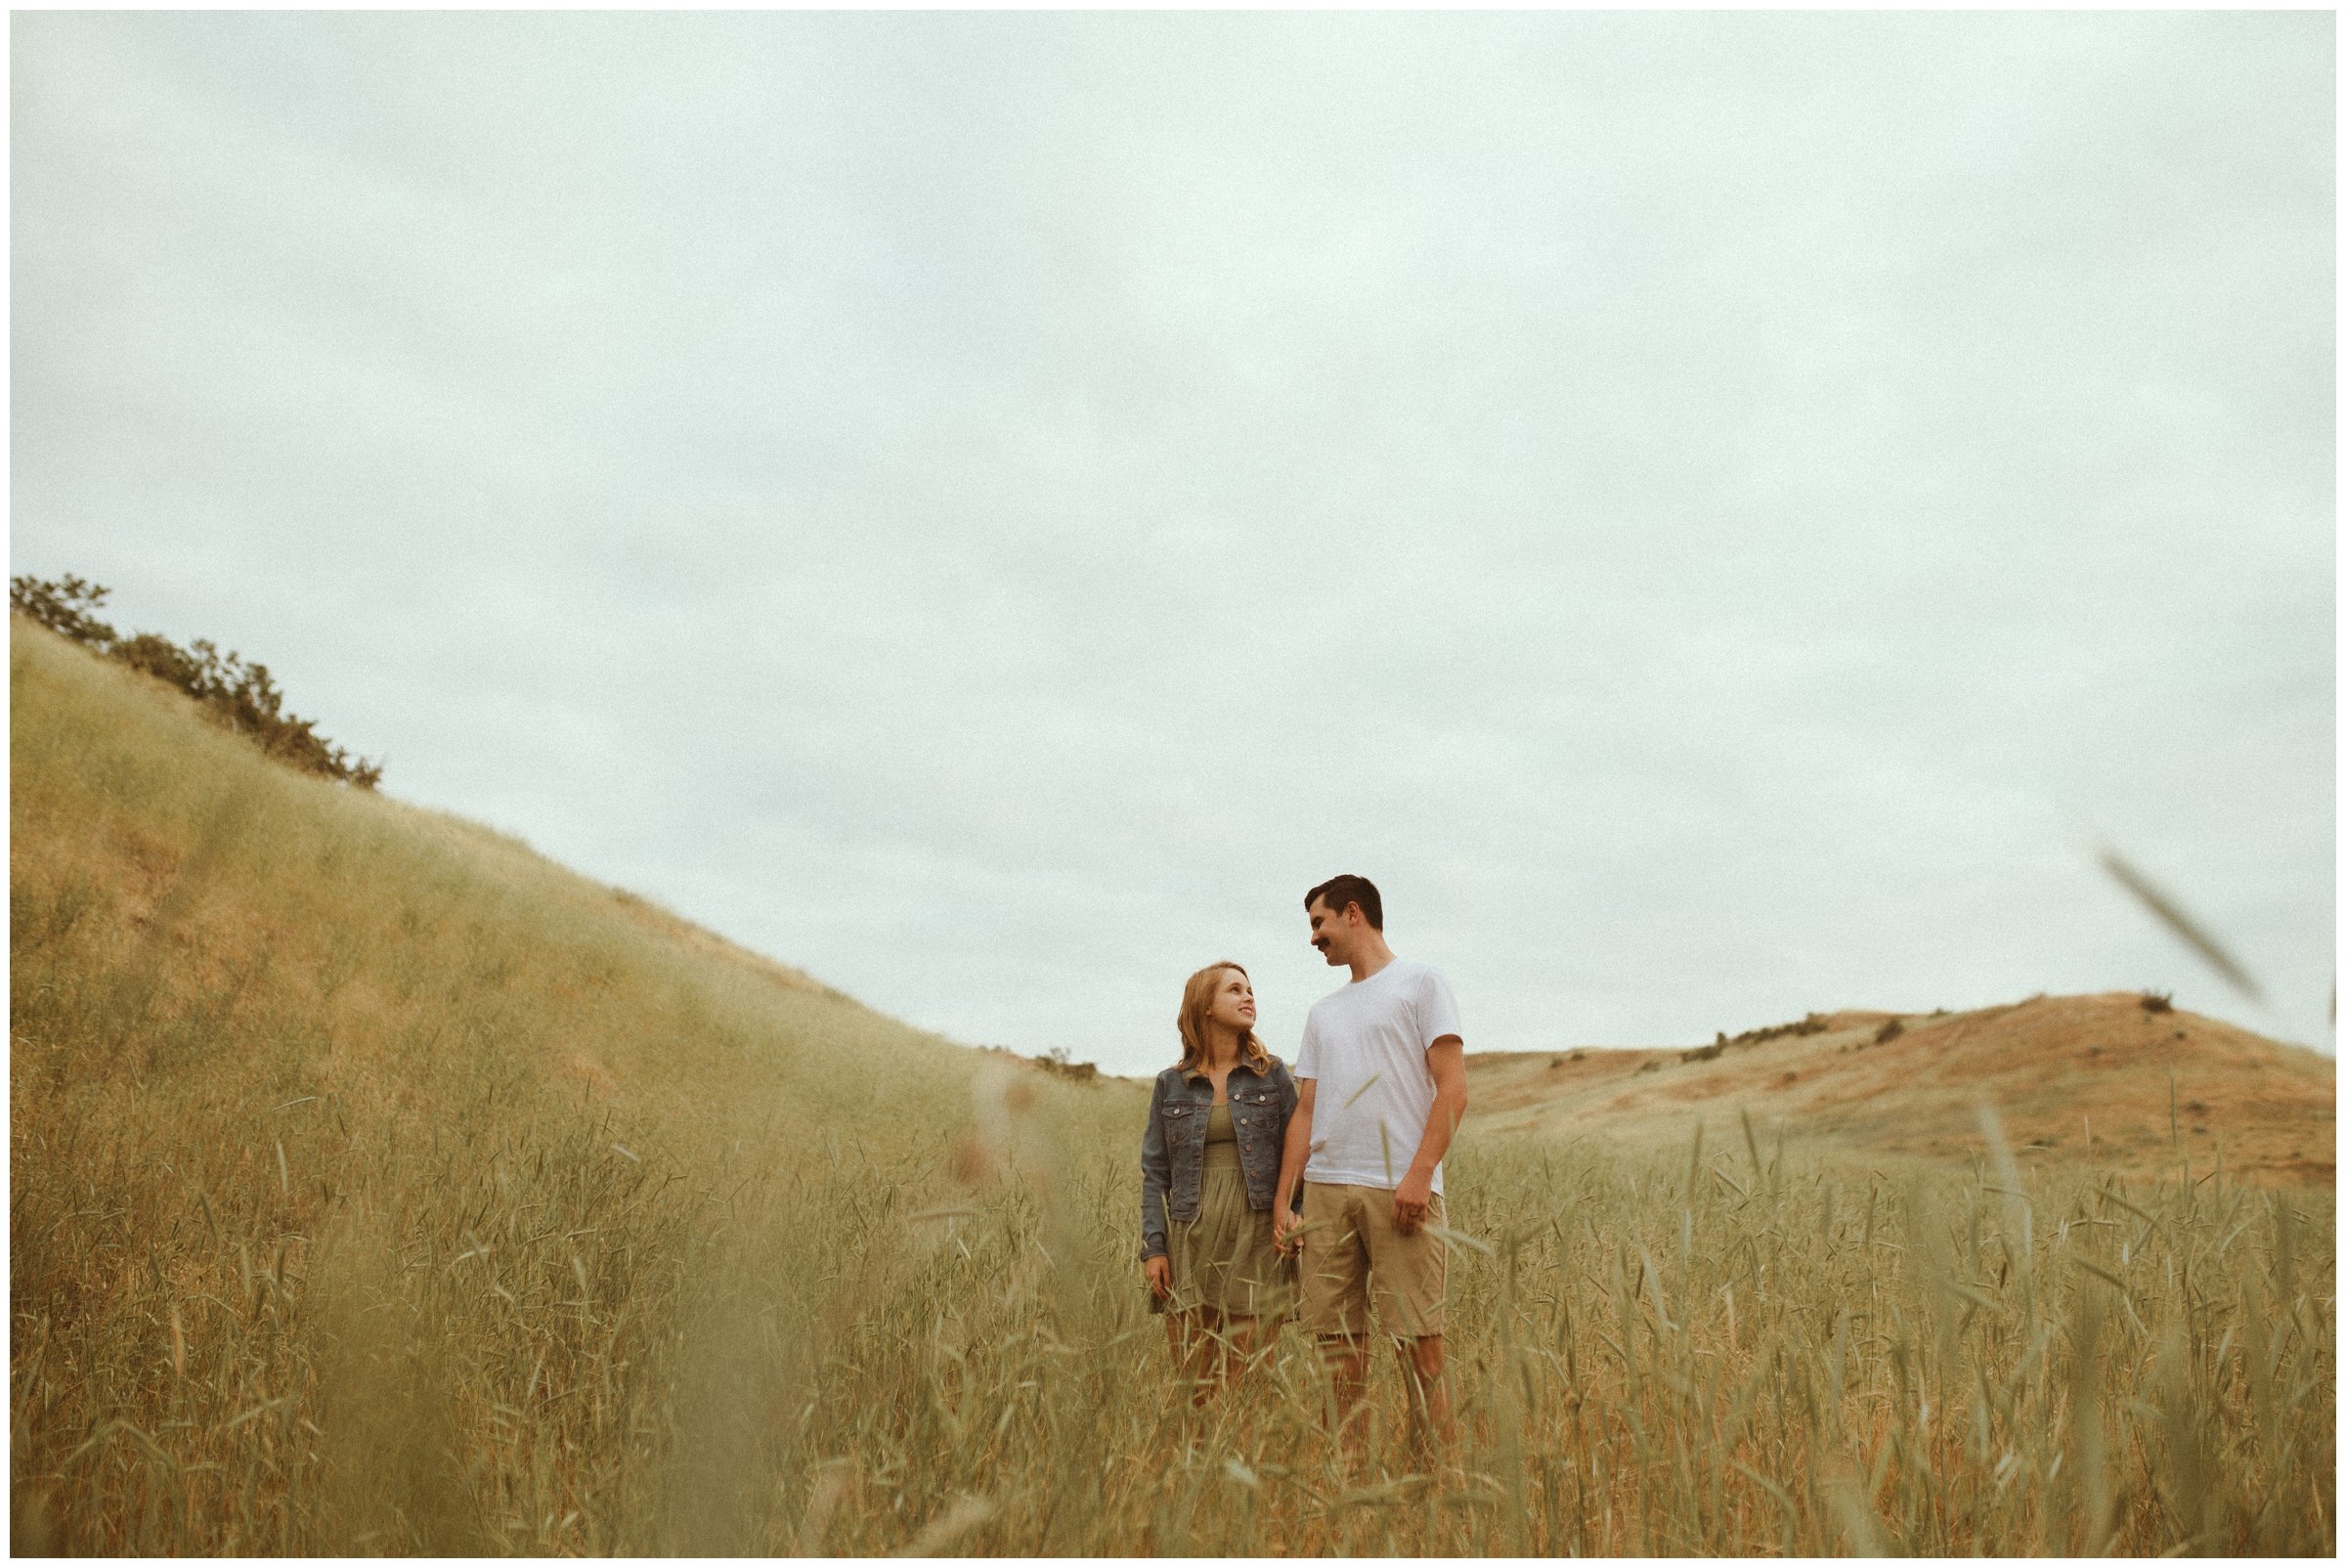  Allison &amp; Kyle’s Mini Couple’s Session in the Boise Foothills by Boise Portrait Photographer, Kamra Fuller Photography 